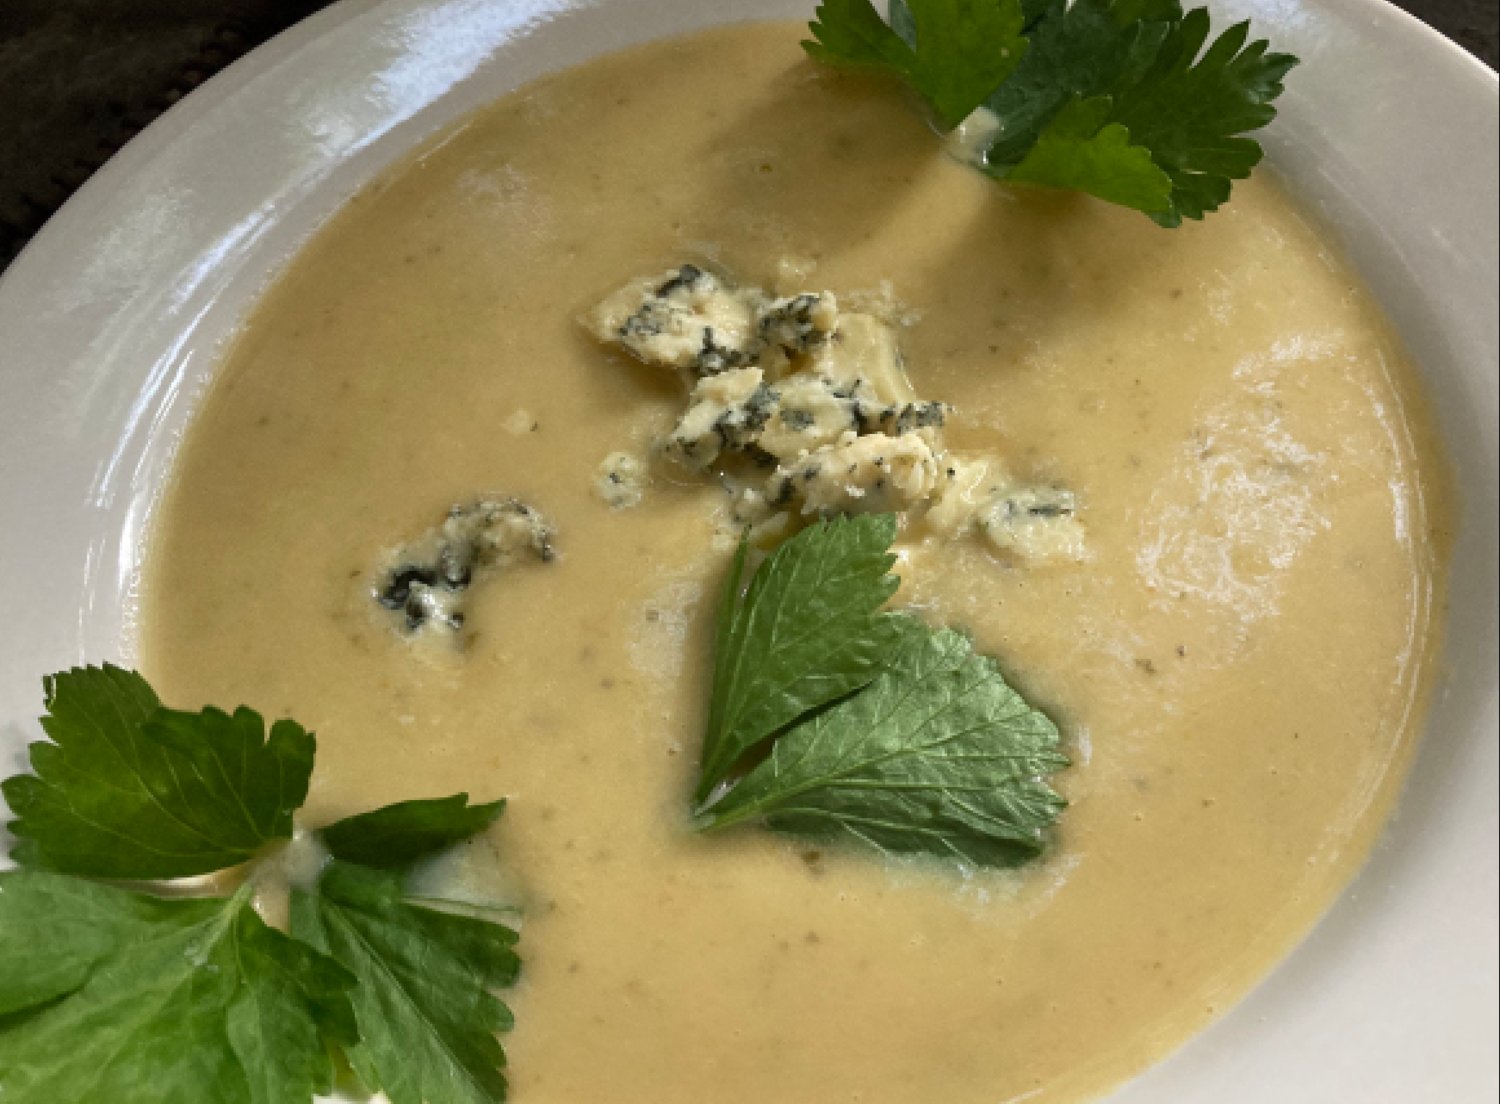 Stilton’s buttery, mellow tang enhances the flavor of this soup made with potatoes, celery, onions and heavy cream.